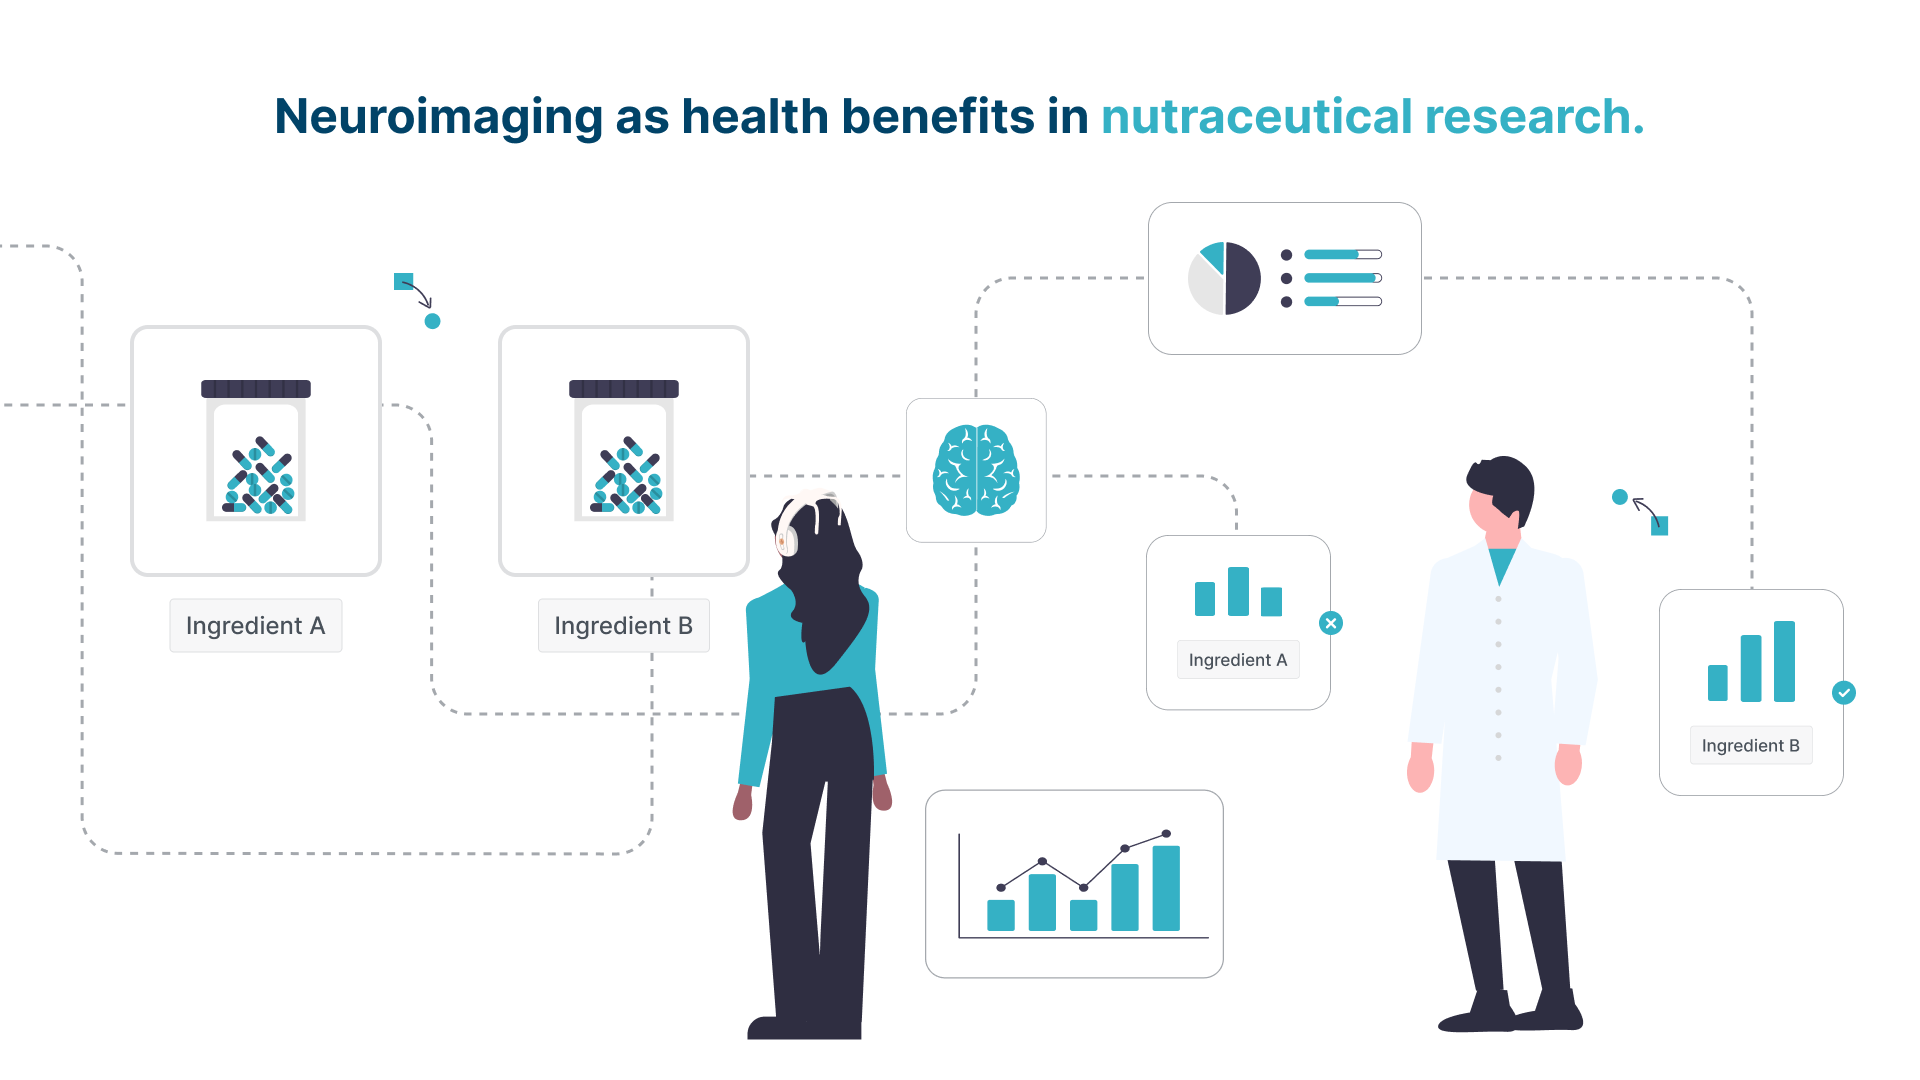 Neuroimaging as health benefits in nutraceutical research